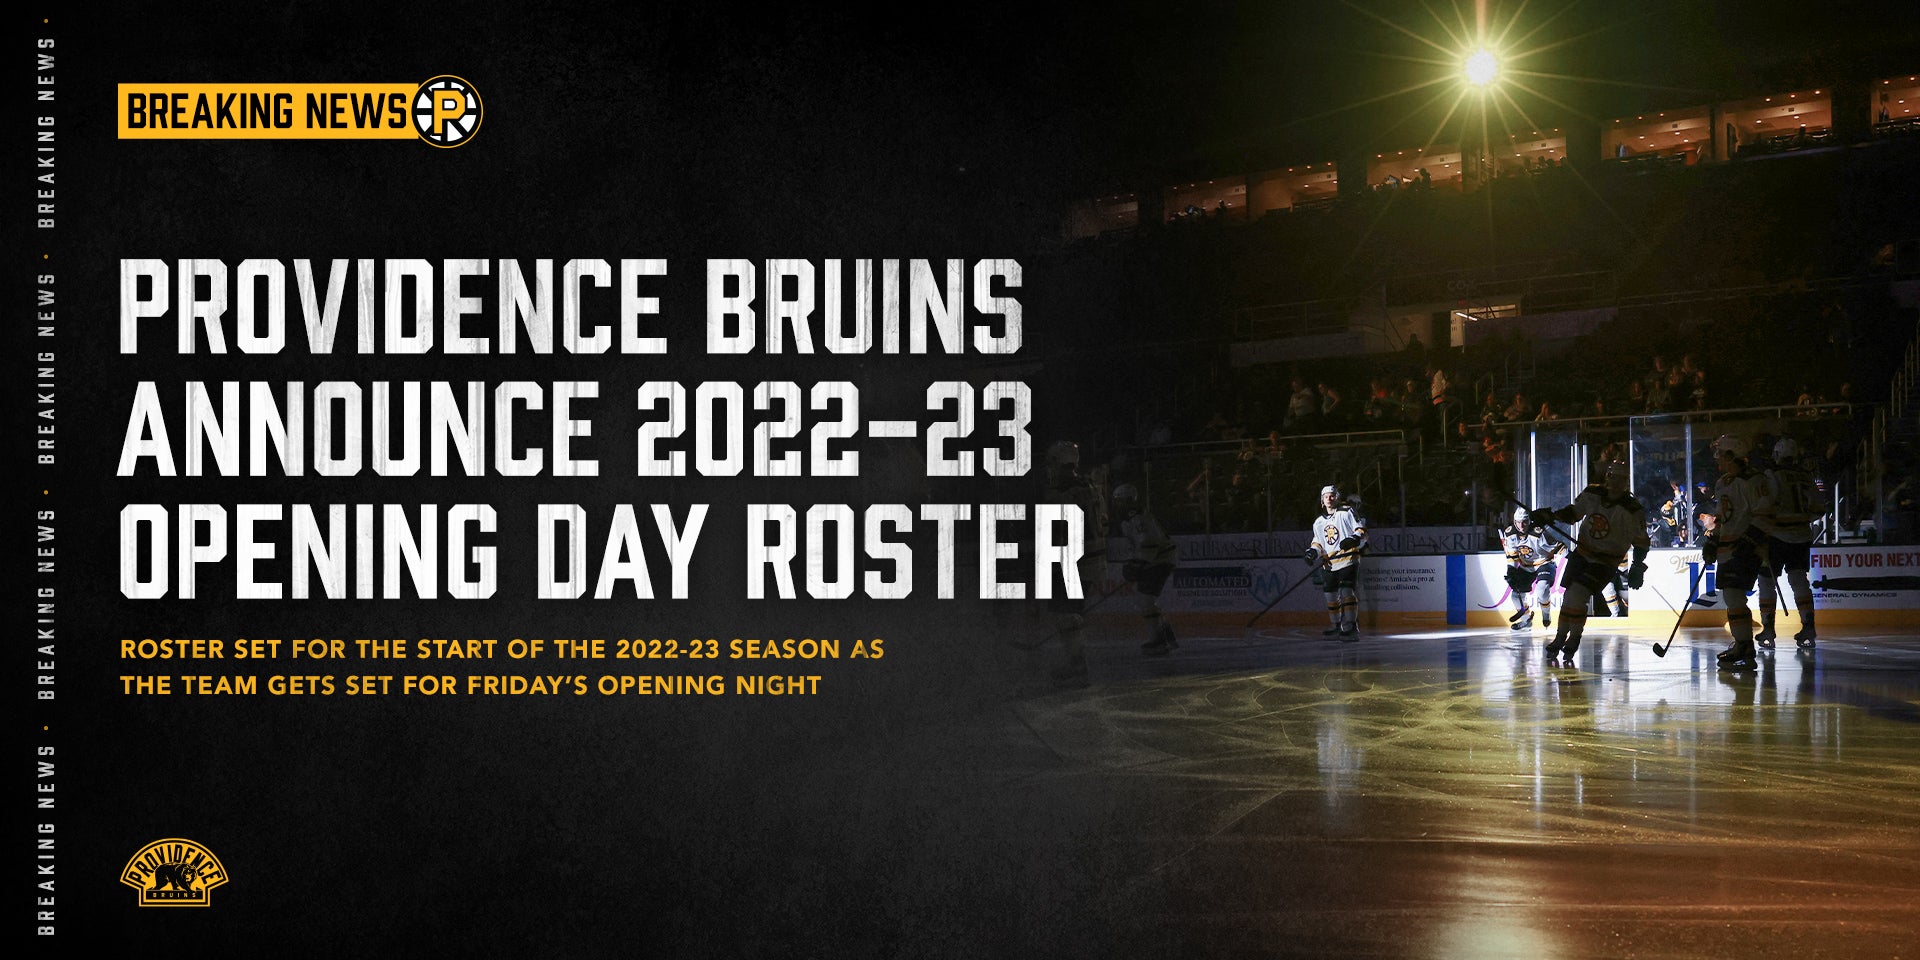 PROVIDENCE BRUINS ANNOUNCE 202223 OPENING DAY ROSTER Providence Bruins